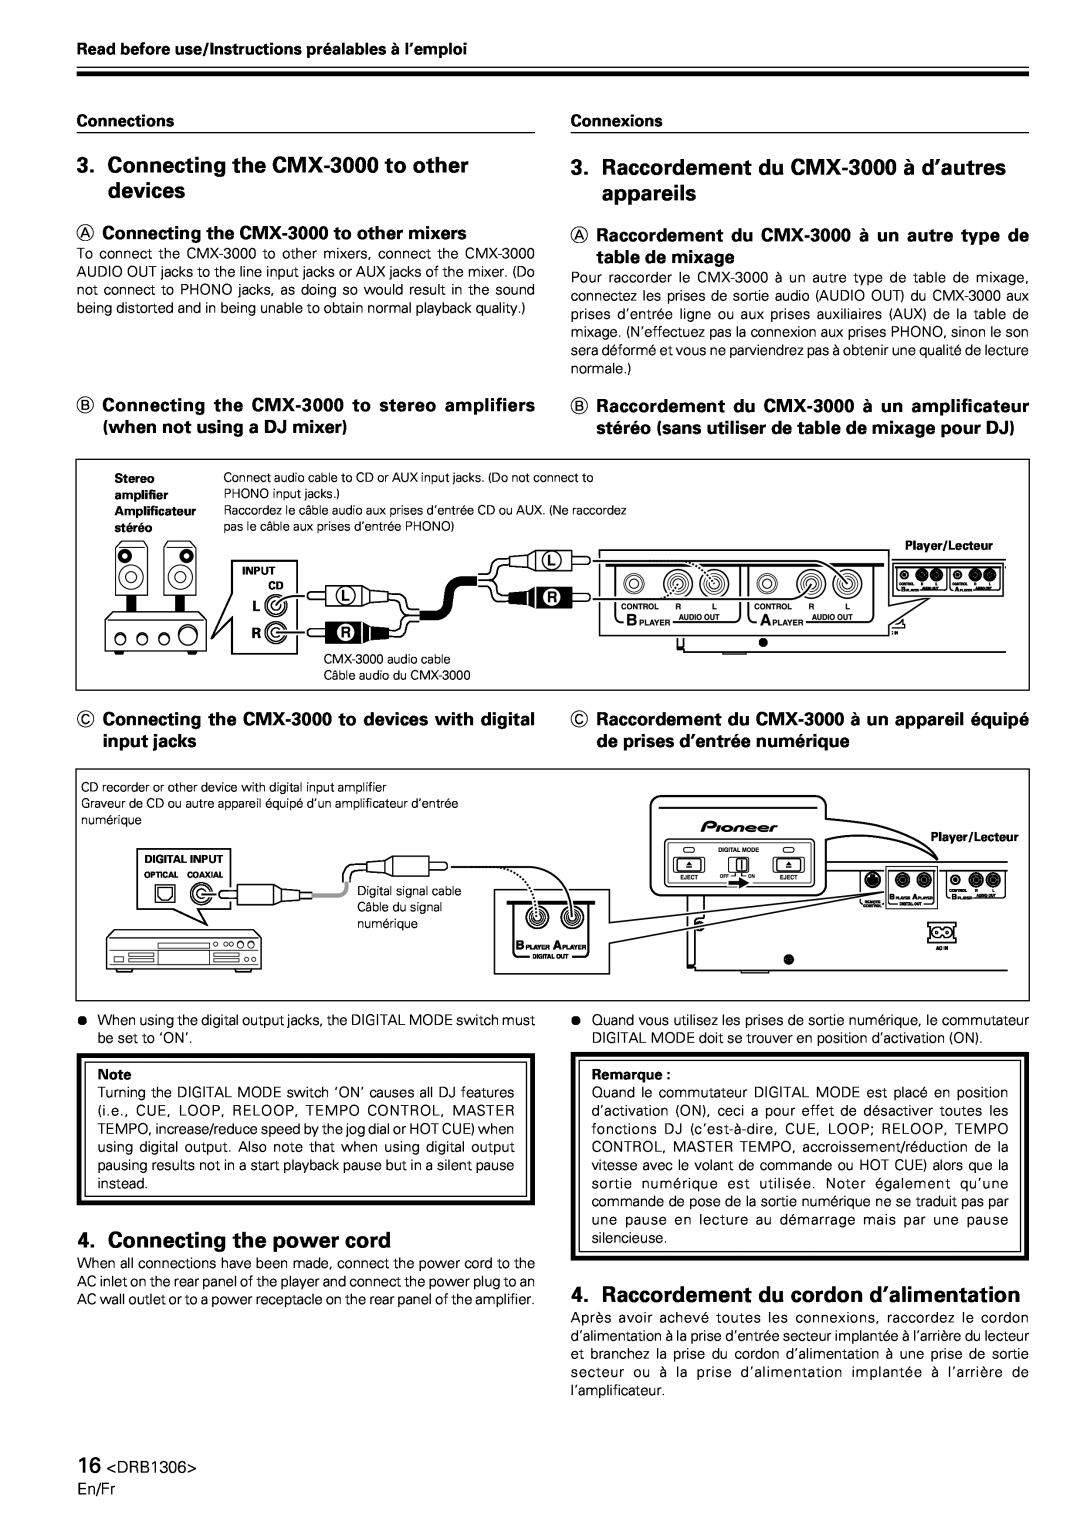 Pioneer operating instructions Connecting the CMX-3000to other devices, Raccordement du CMX-3000à d’autres appareils 